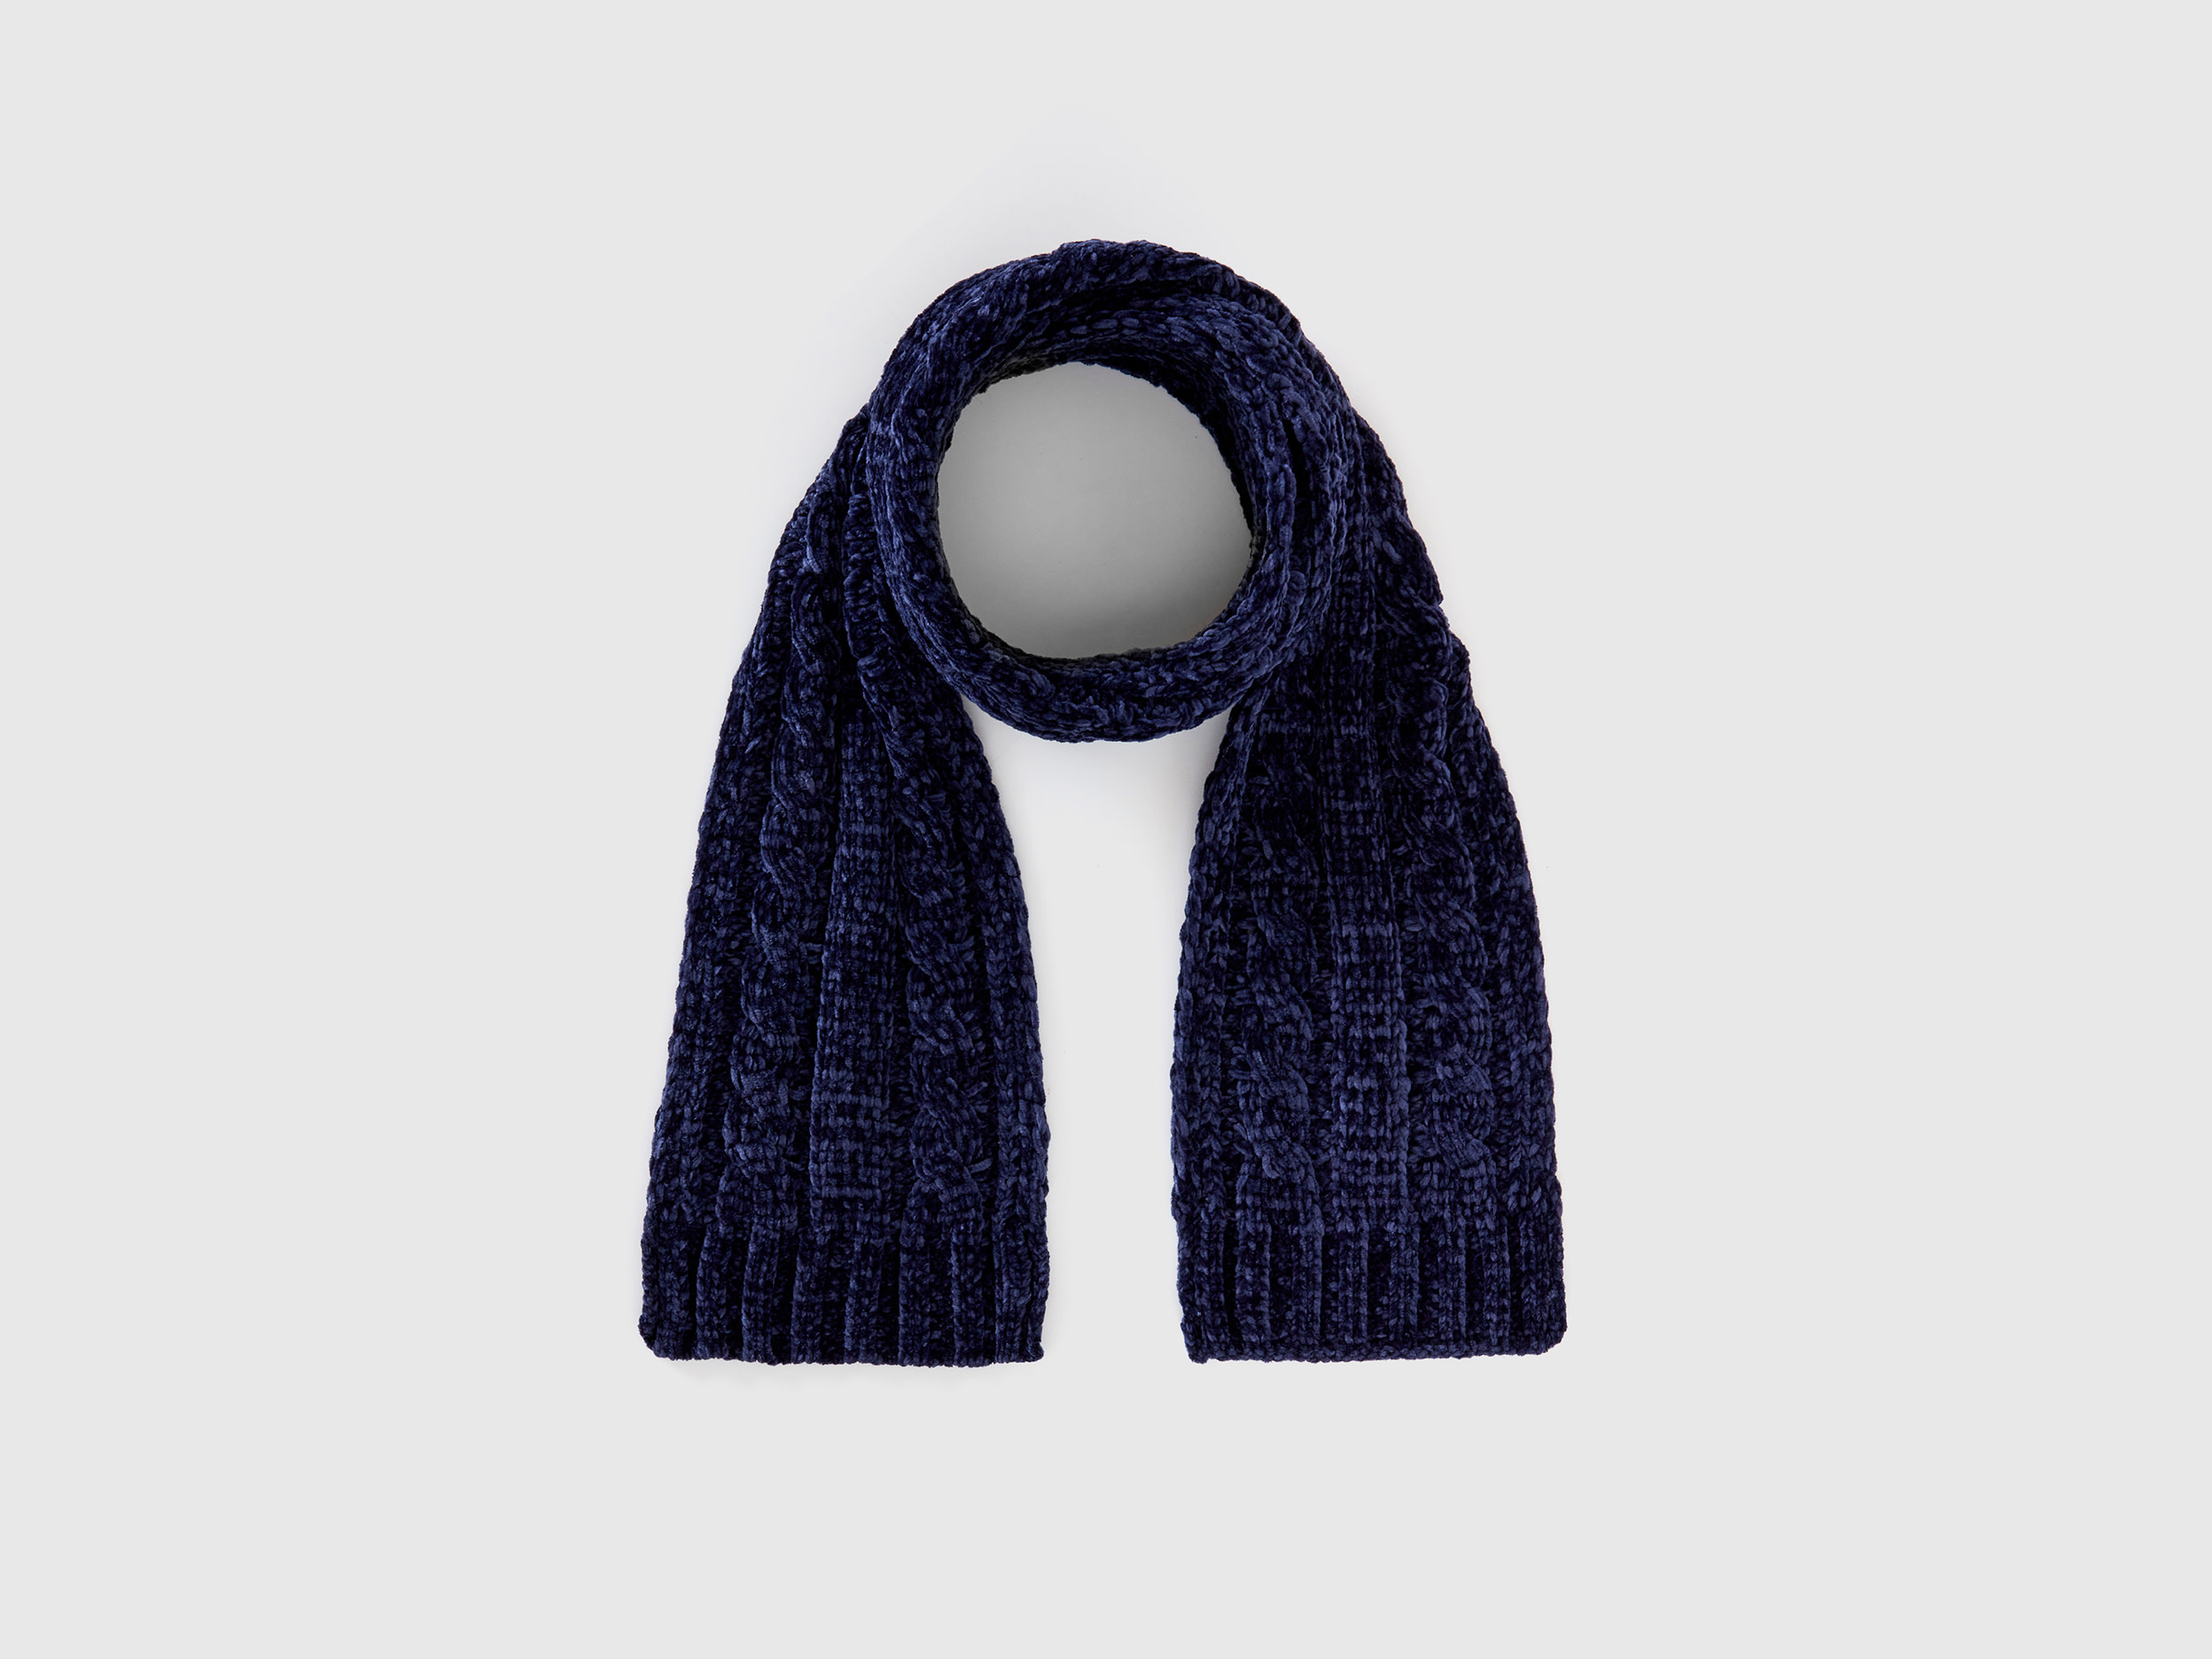 Benetton, Chenille Scarf With Cable Knit, size 1-3, Dark Blue, Kids